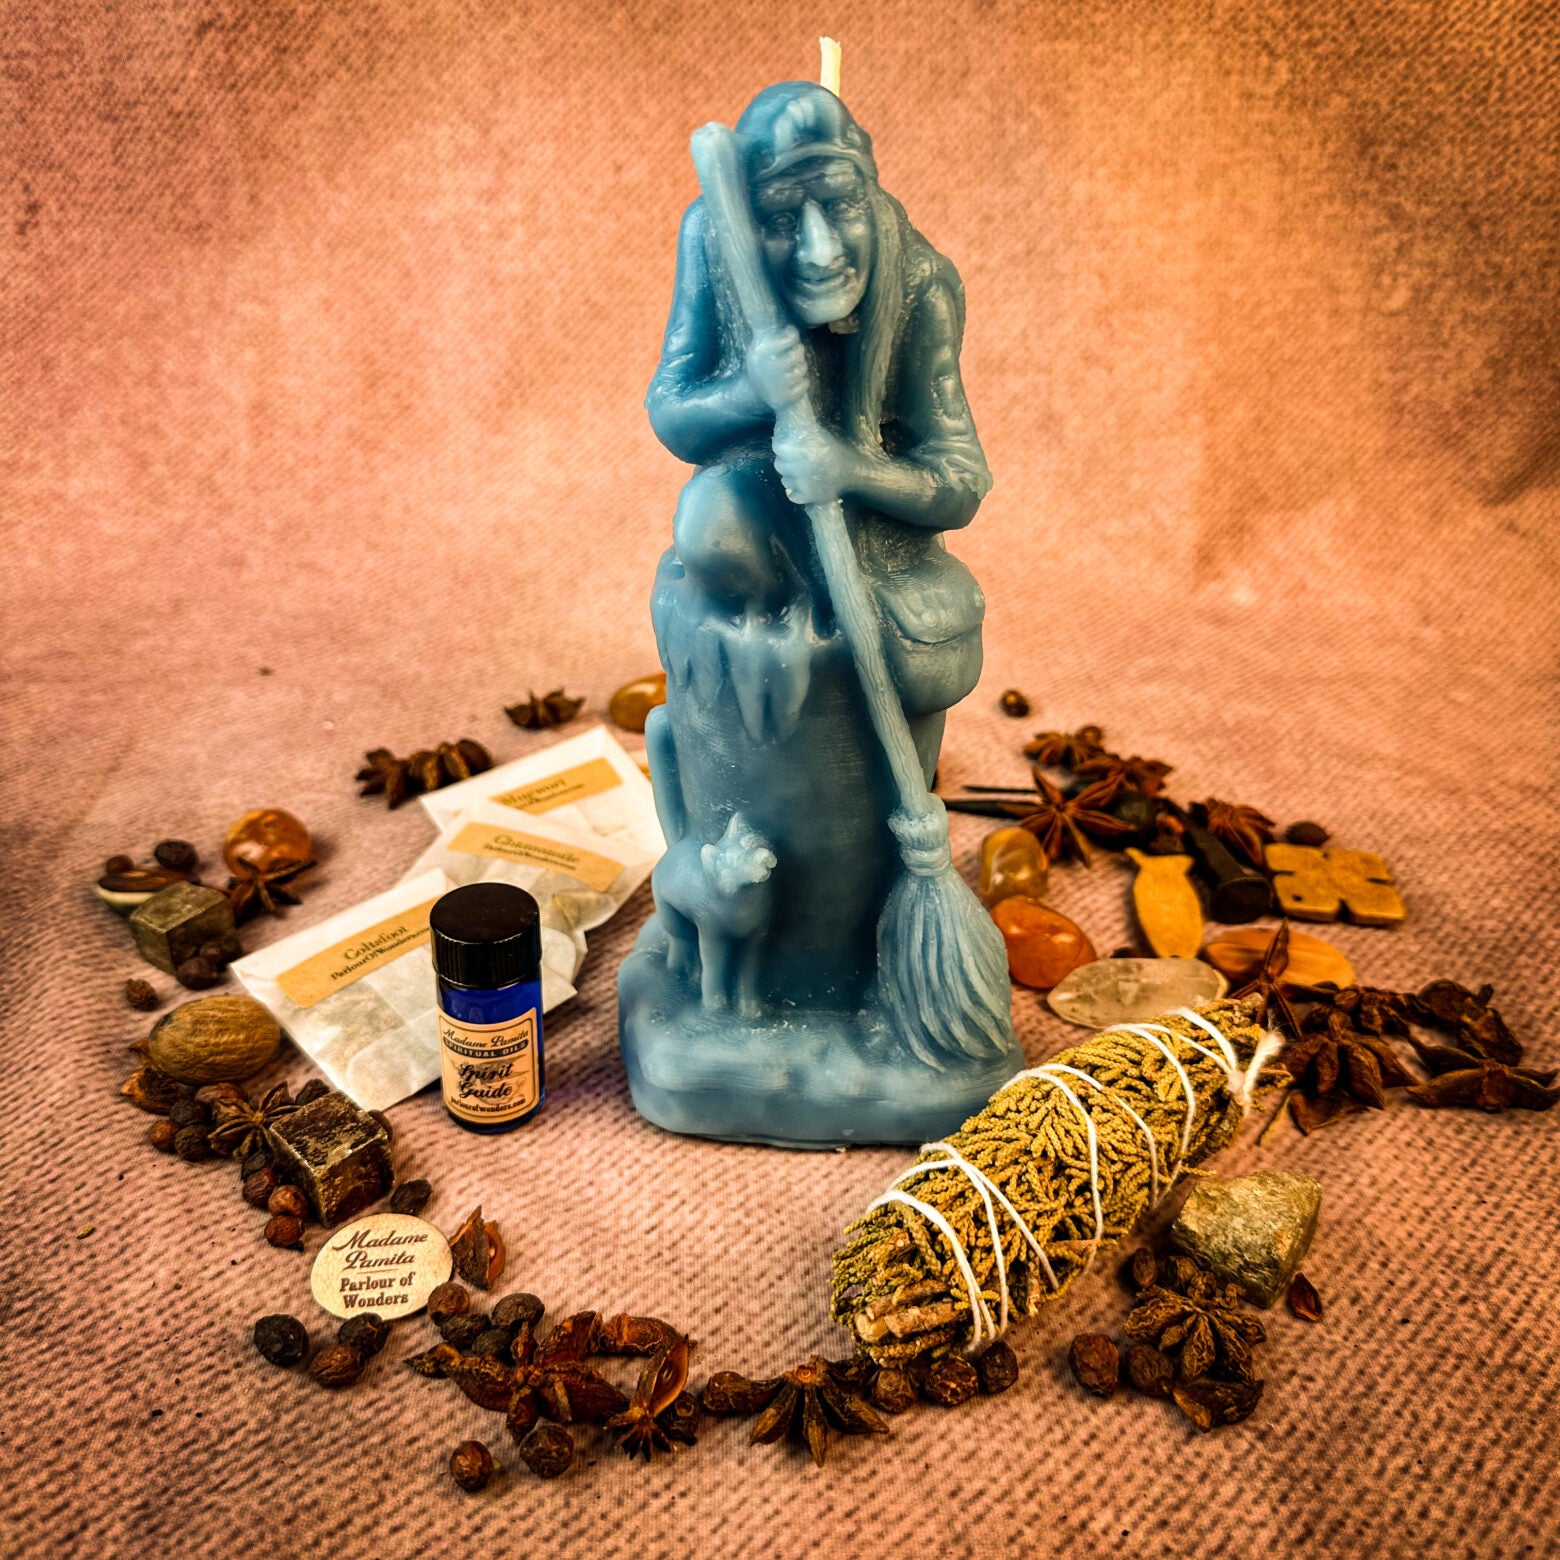 Blessings of Baba Yaga Candle Spell Kit